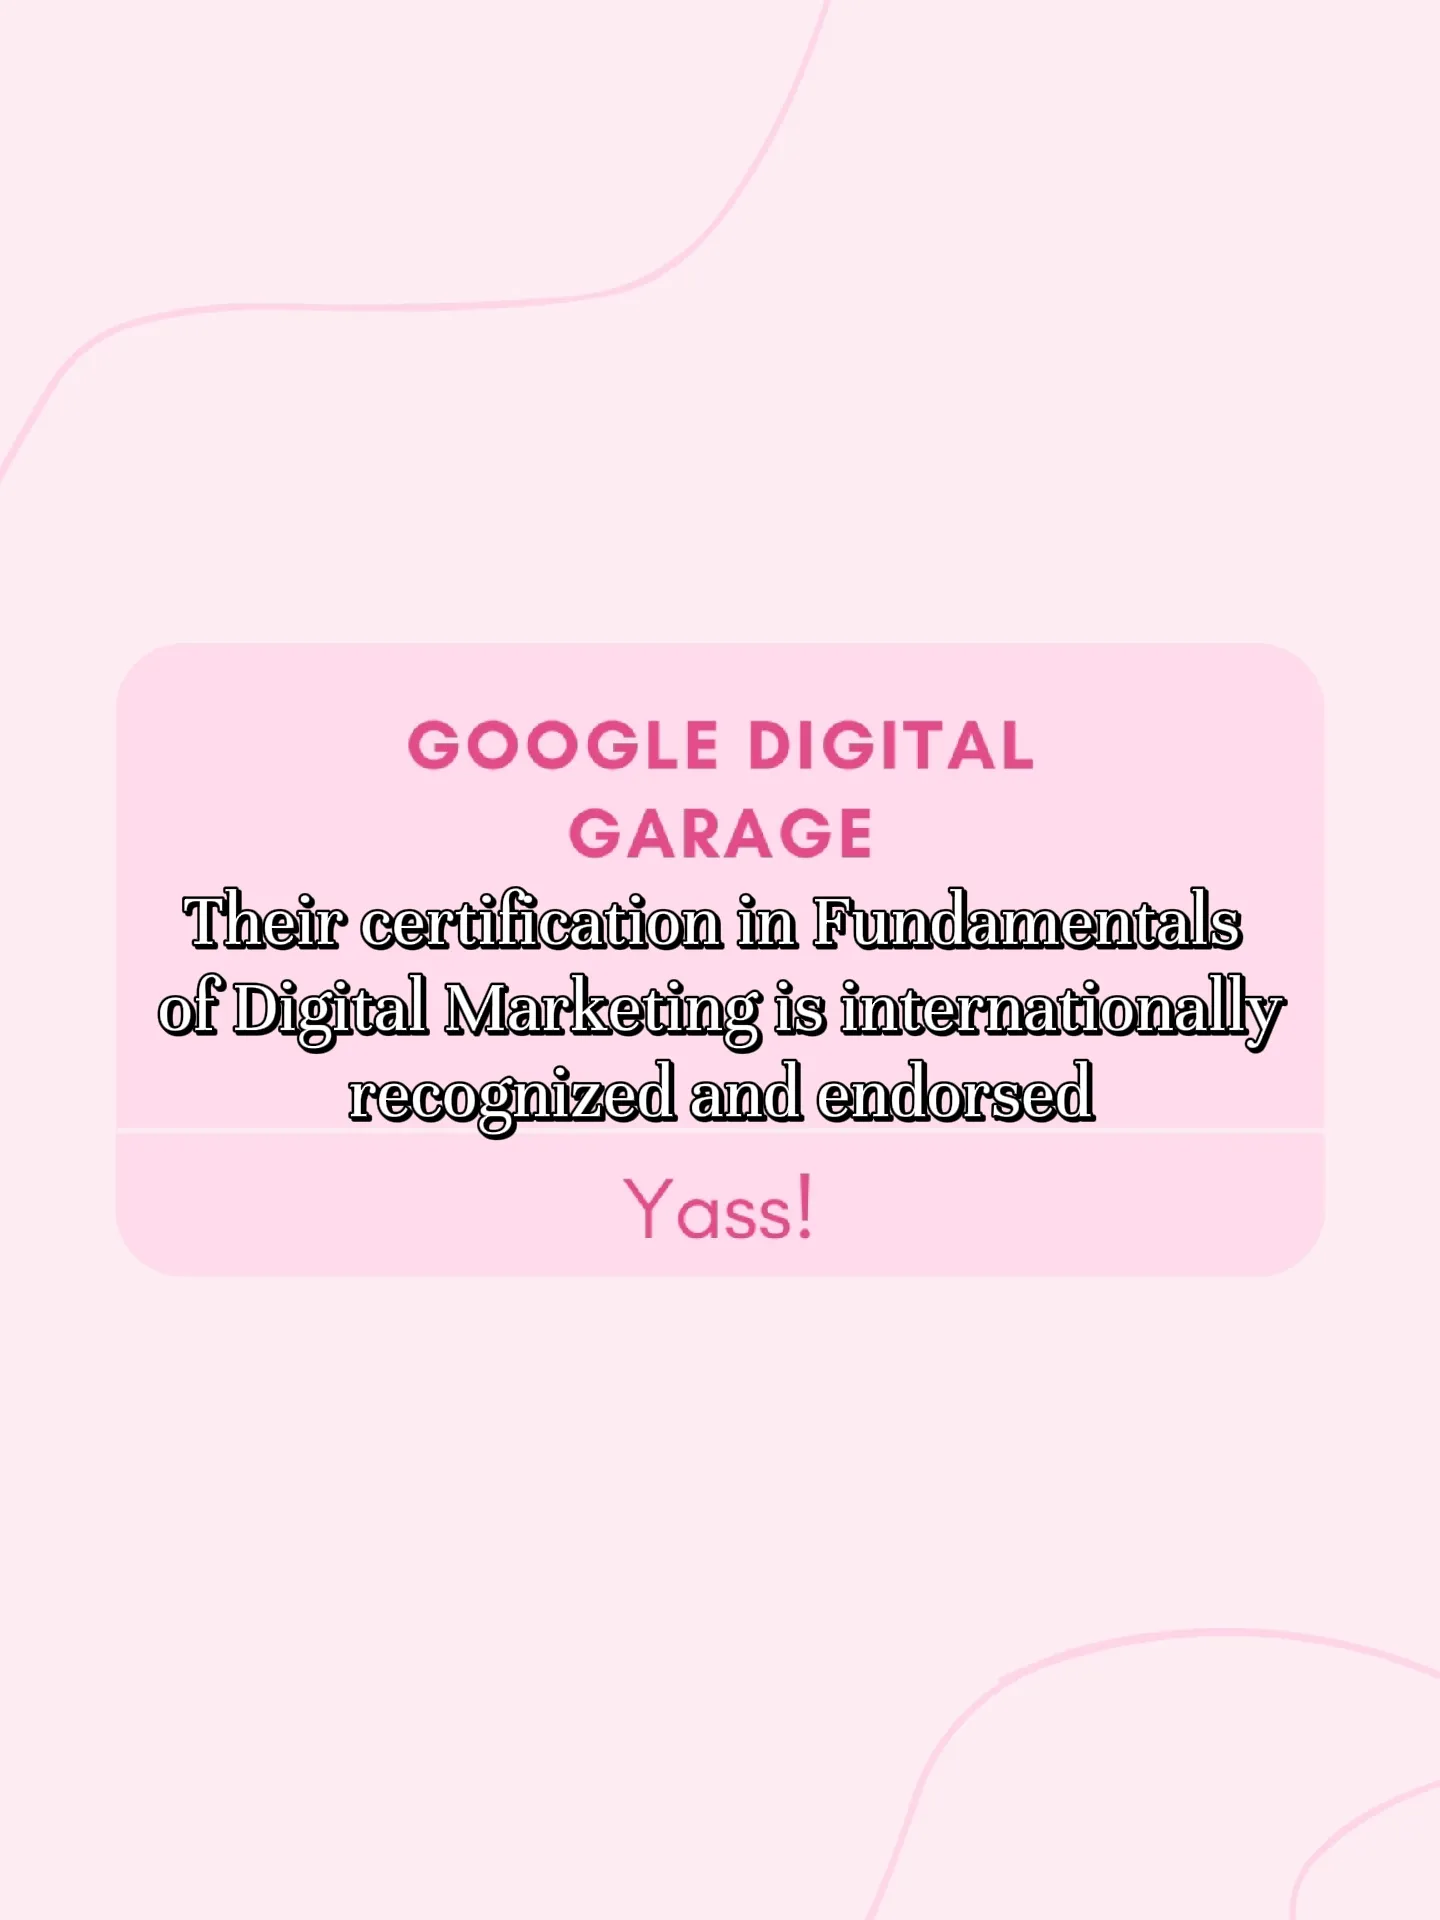  A white background with a pink logo for Google Digital Garage.